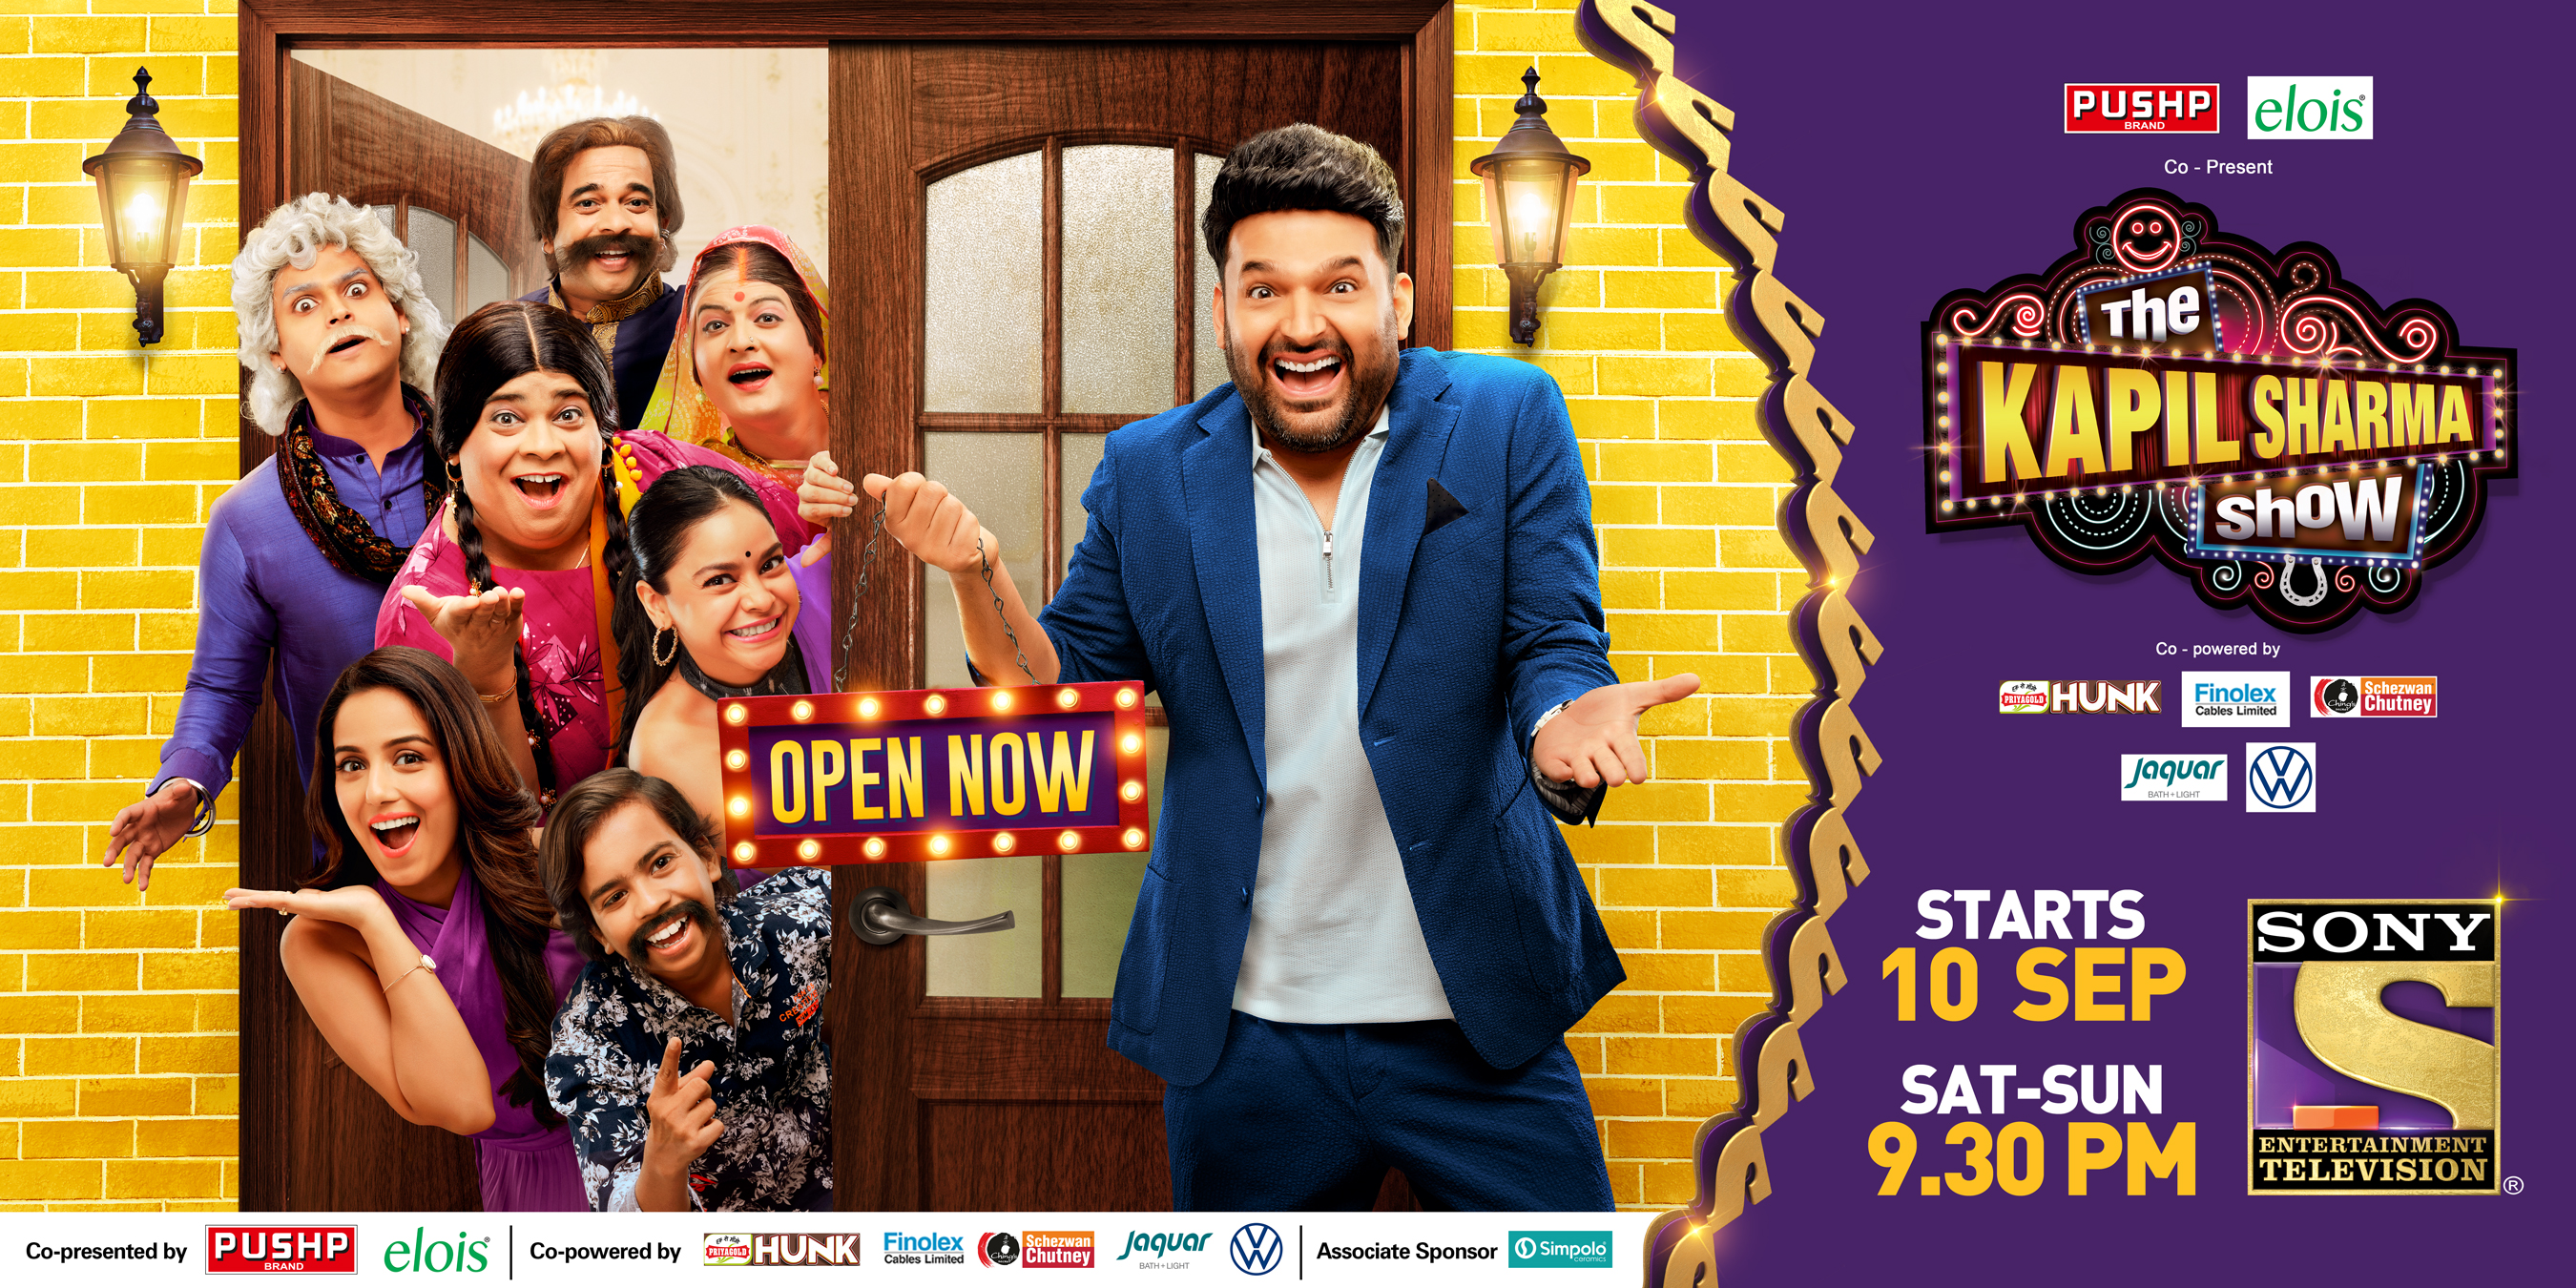 India’s most celebrated comedy show ‘The Kapil Sharma Show’ is back with a bang on Sony Entertainment Television in a ‘Naya Avtaar’ & with a ‘Naya Parivaar’